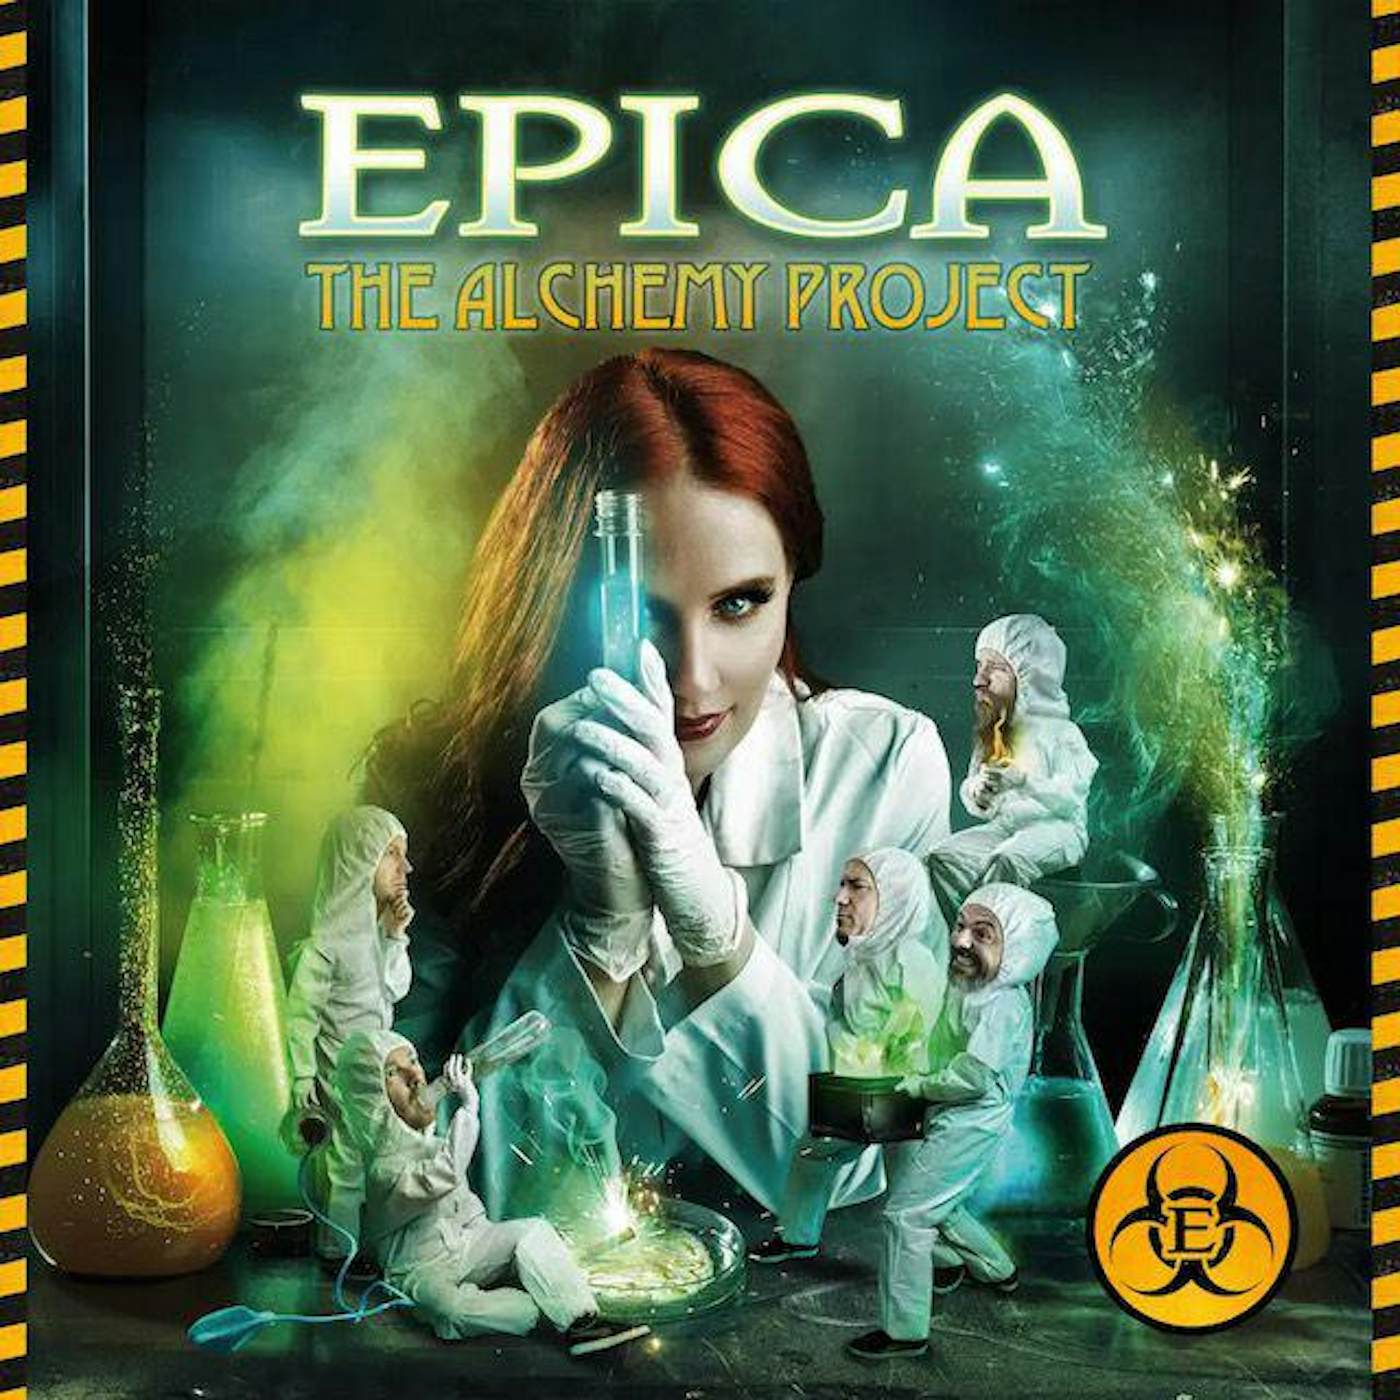 Epica Alchemy Project (Toxic Green) Vinyl Record